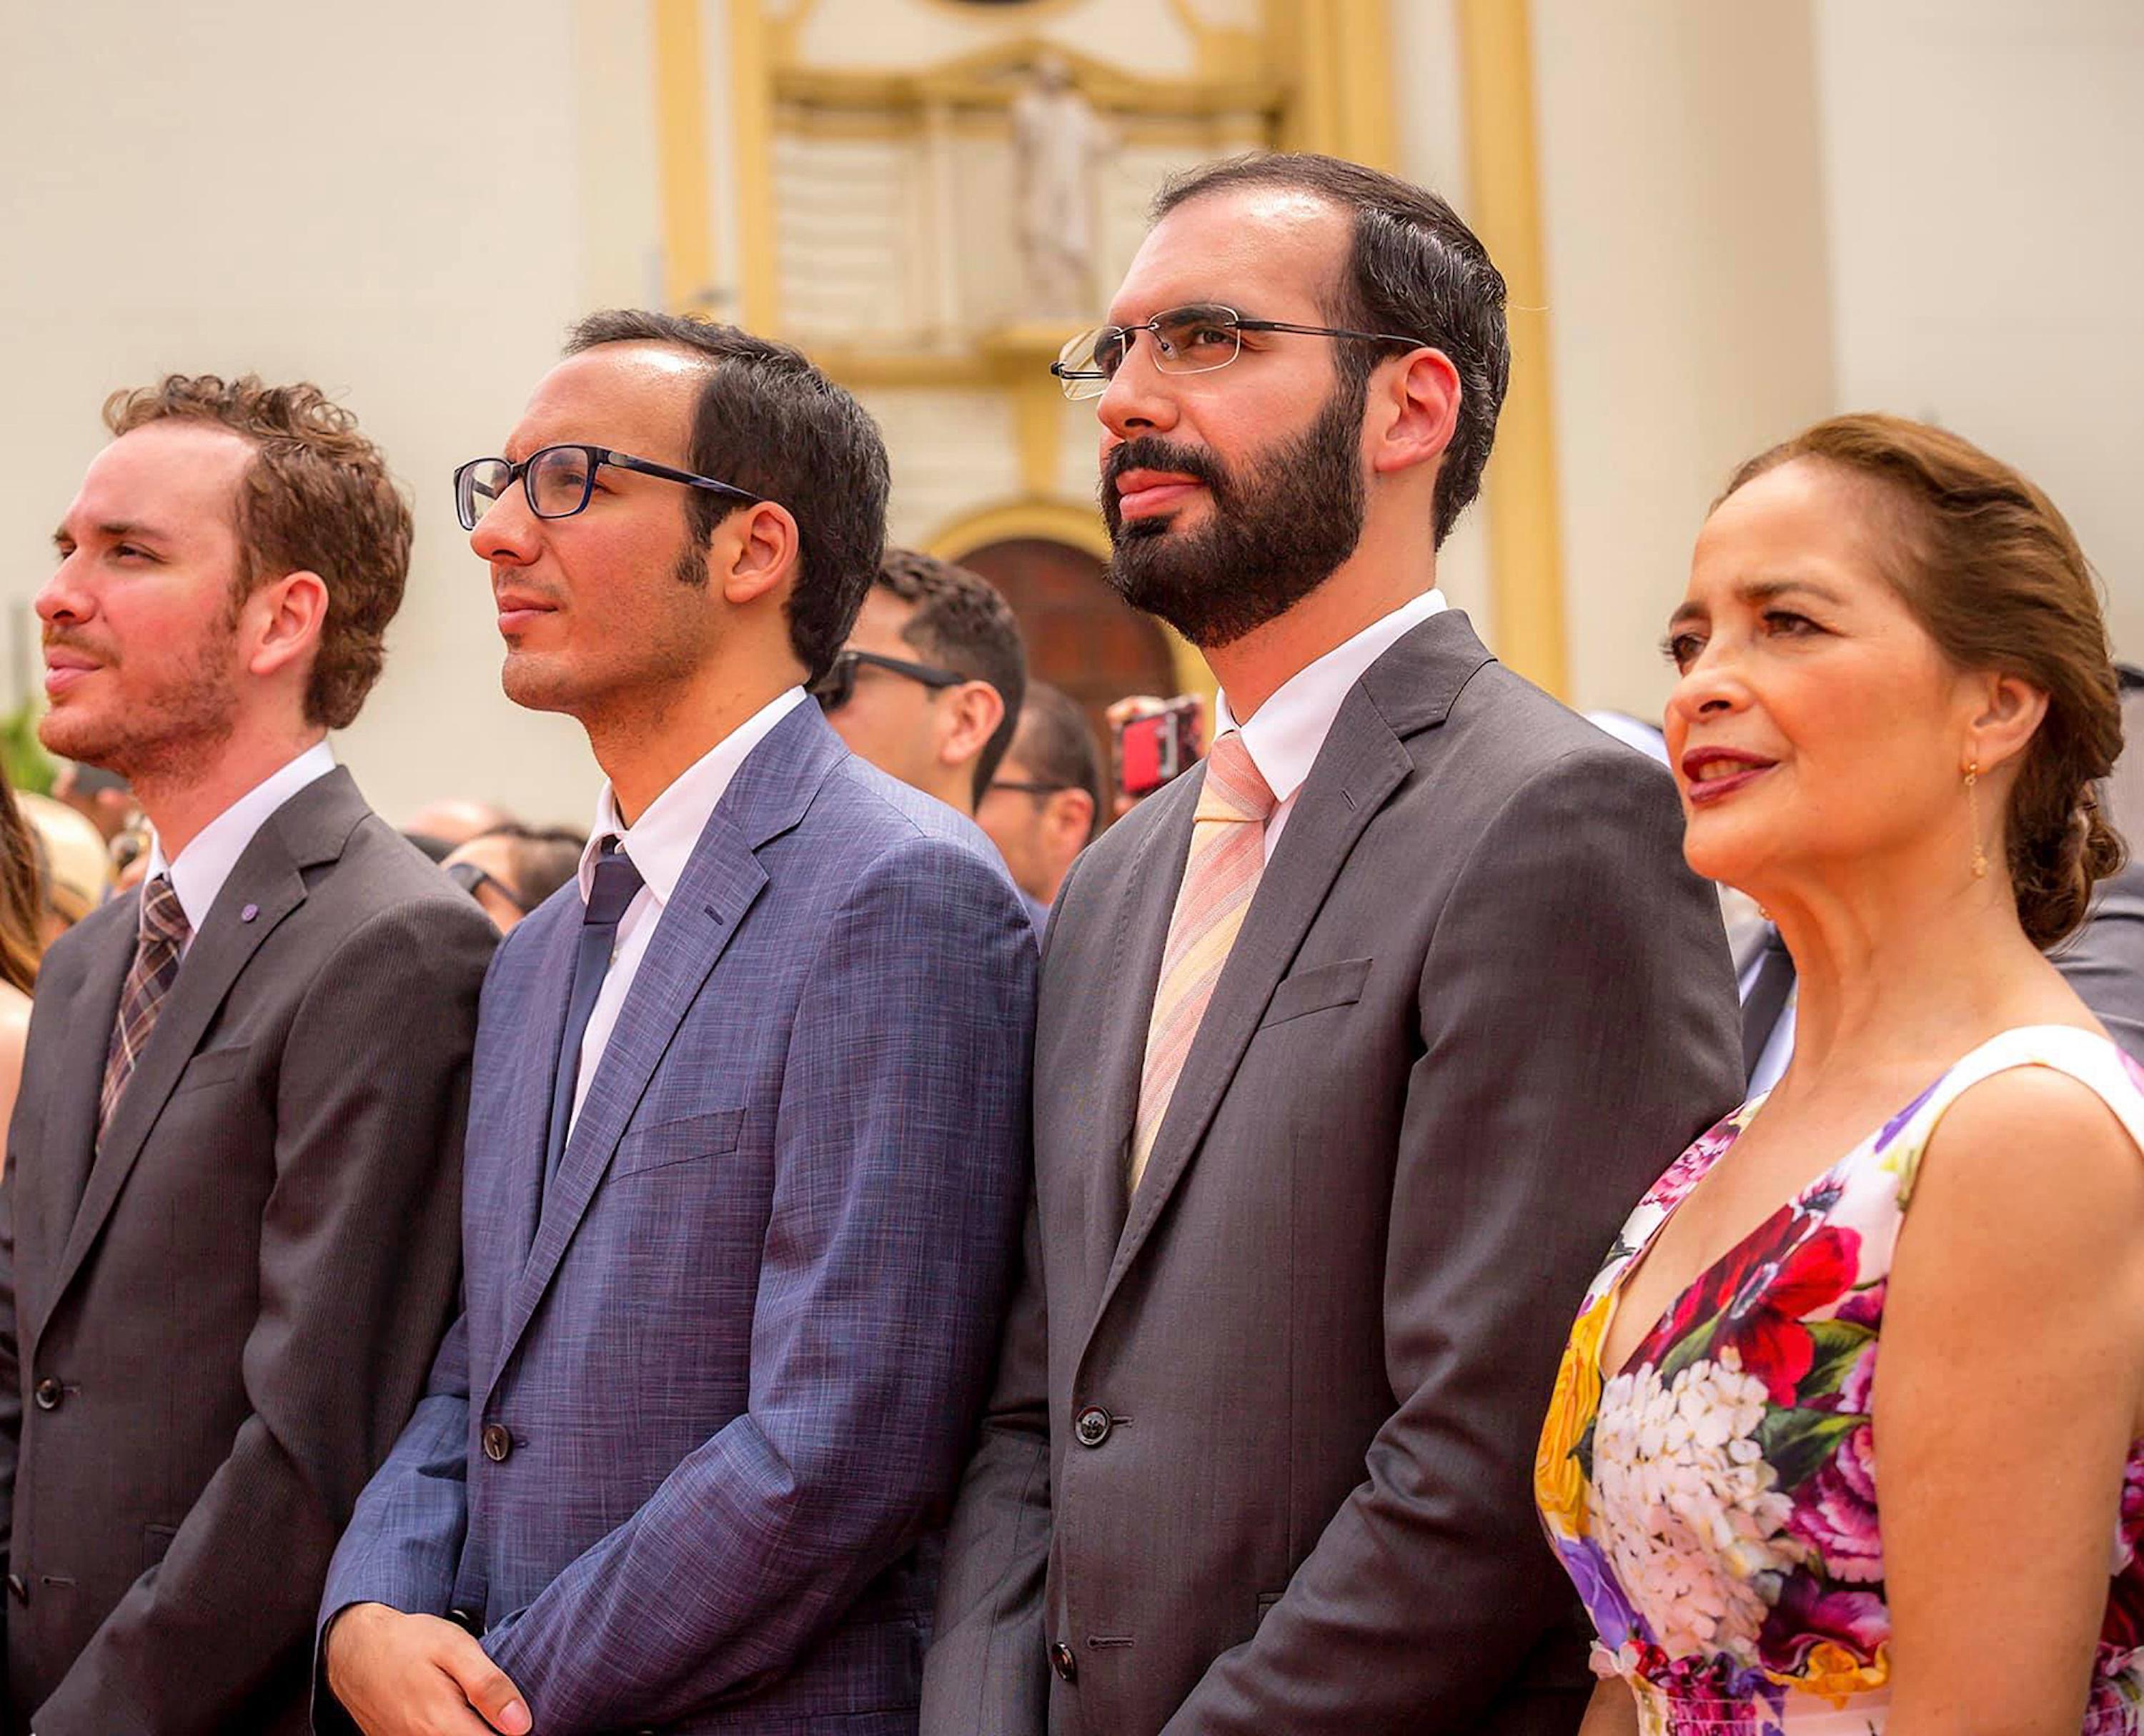 Nayib Bukele’s mother, Olga Ortez, and his brothers Karim, Ibrajim and Yusef (from right to left) at the president’s inauguration on June 1, 2019. Photo from Karim Bukele’s Facebook page.